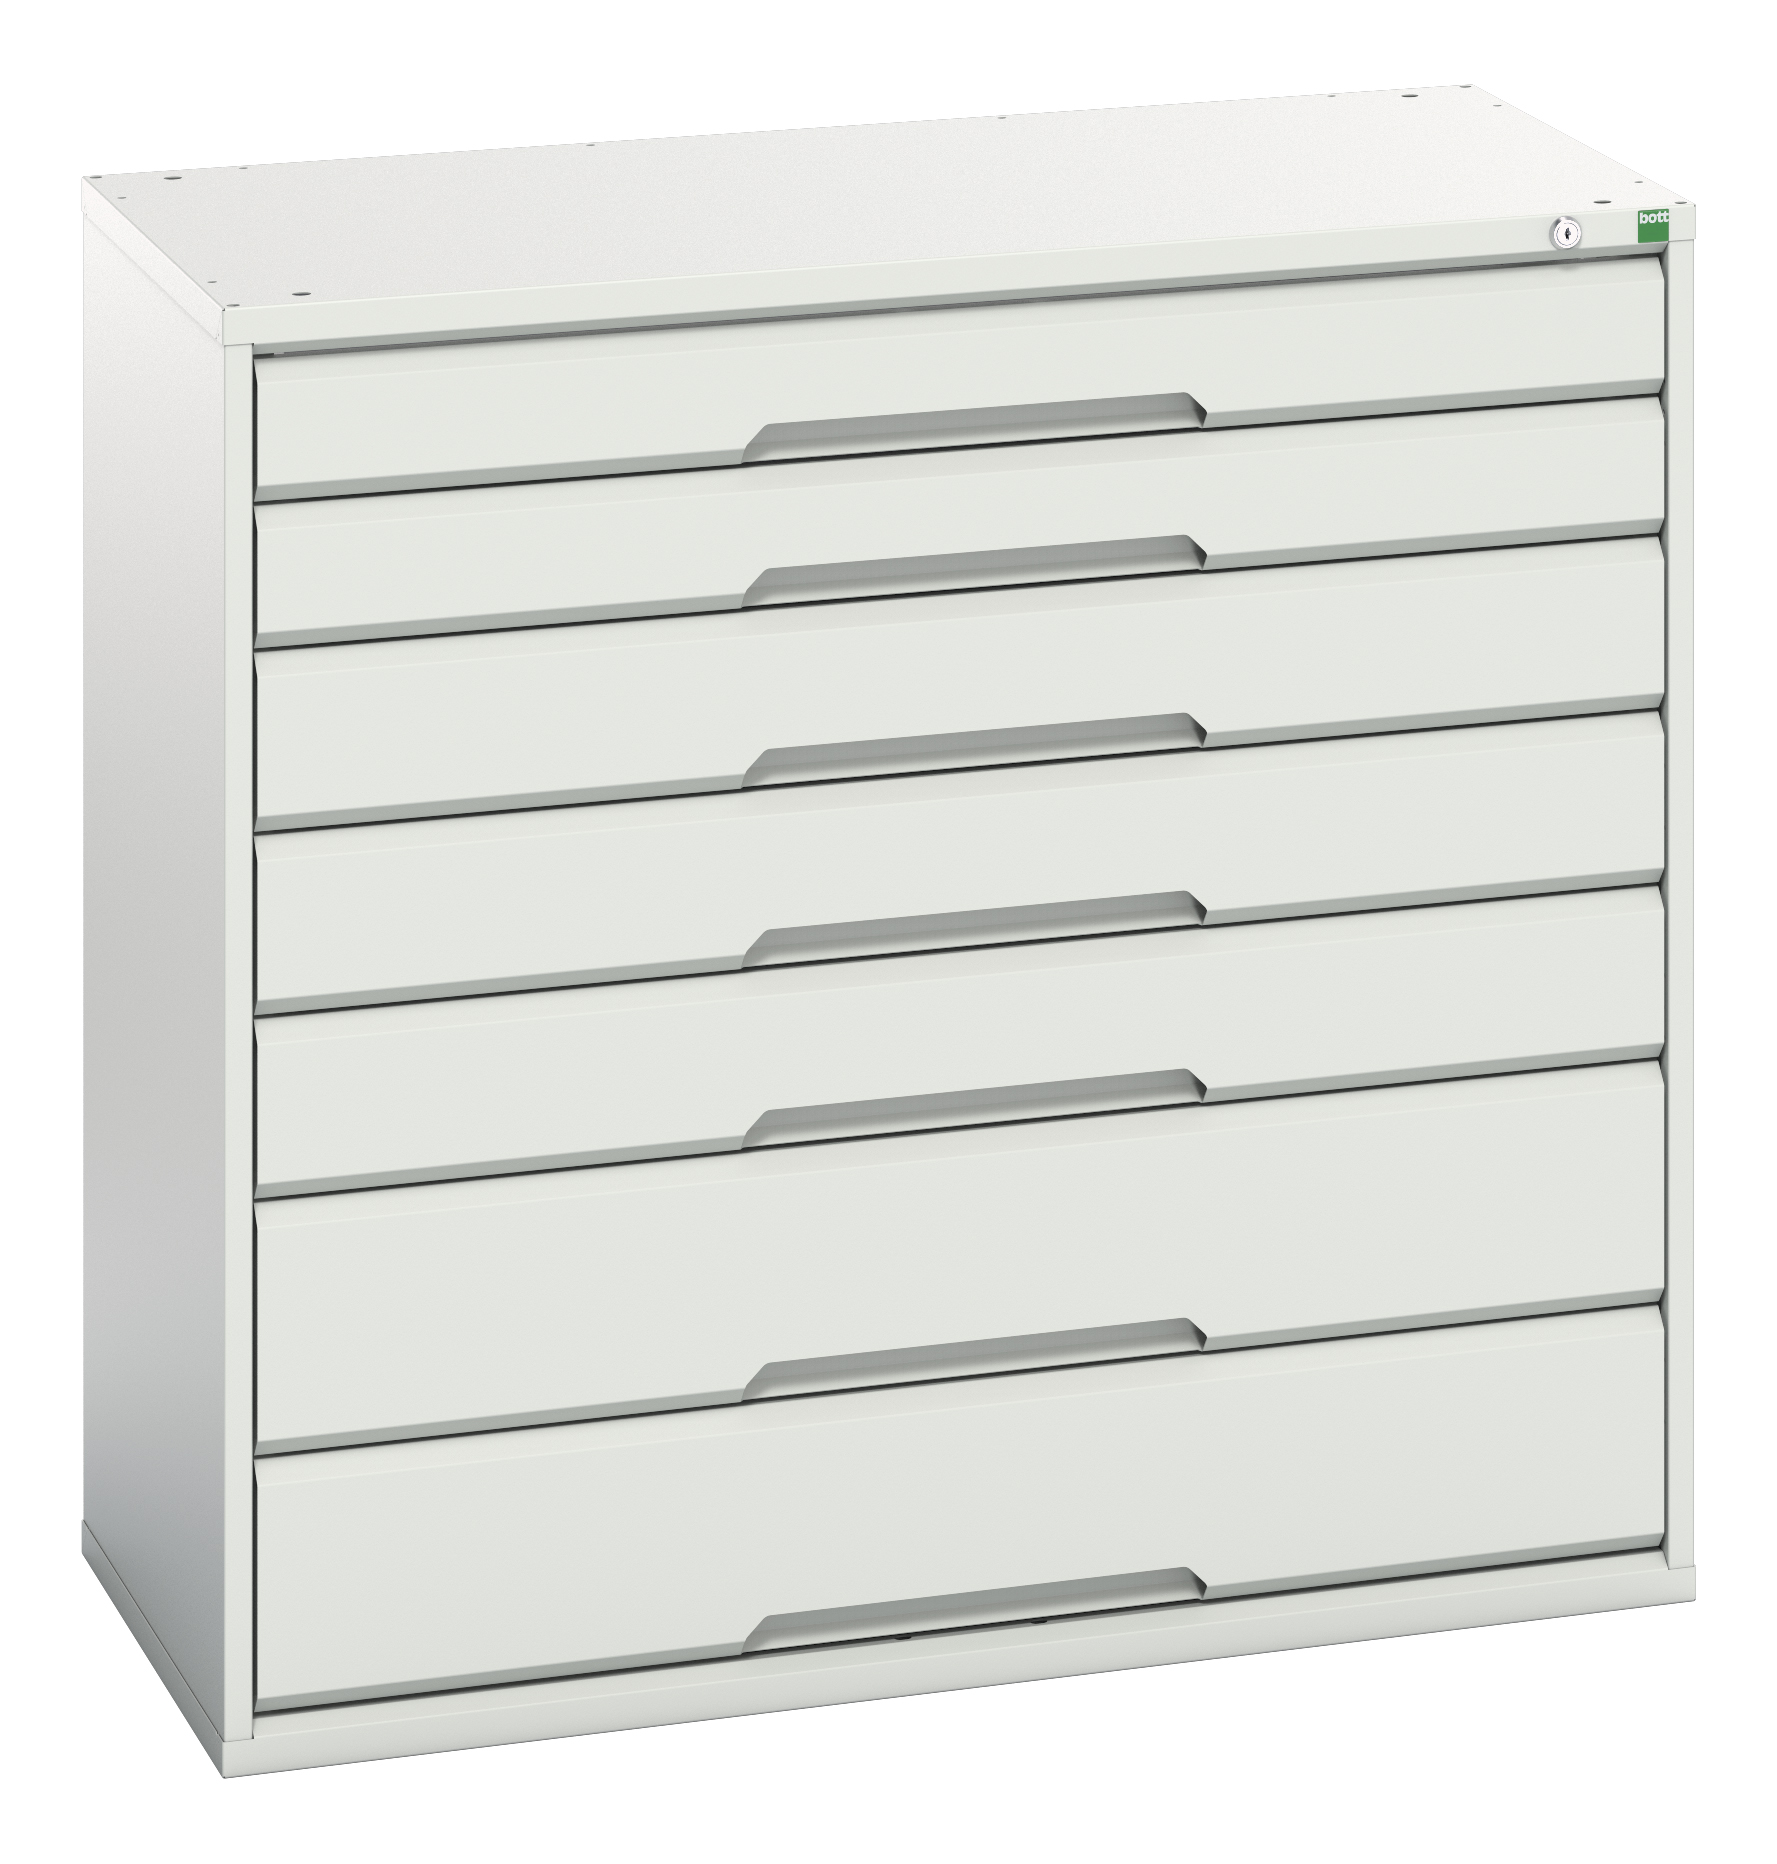 Bott Verso Drawer Cabinet With 7 Drawers - 16925249.16